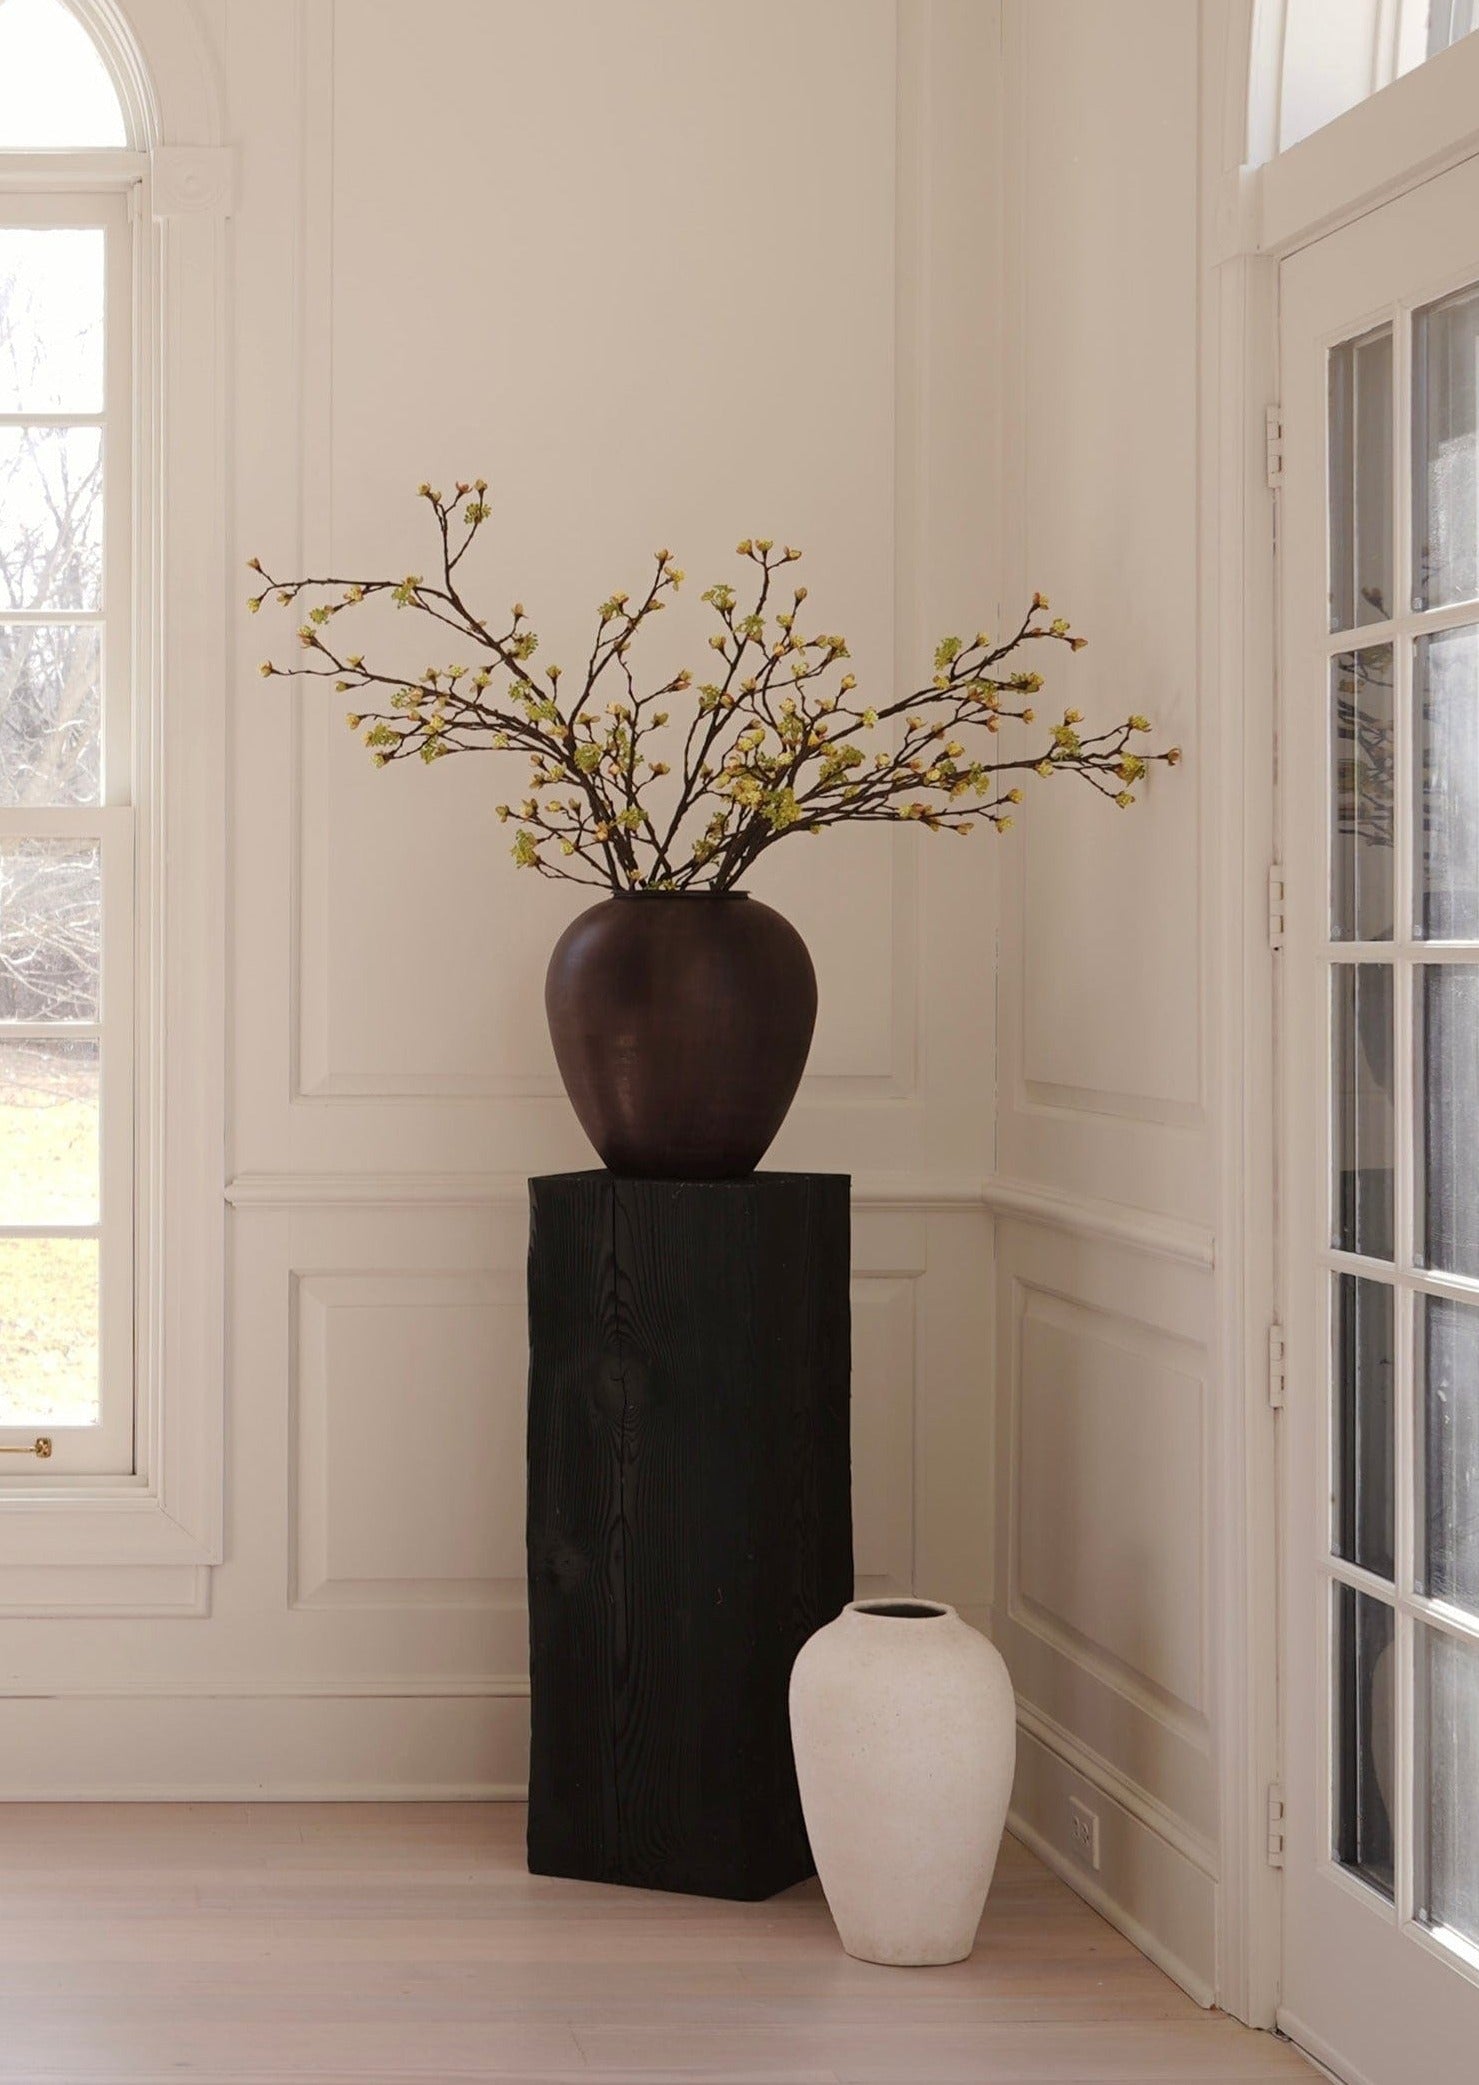 Artificial Budding Branches Styled in Large Brass Vase